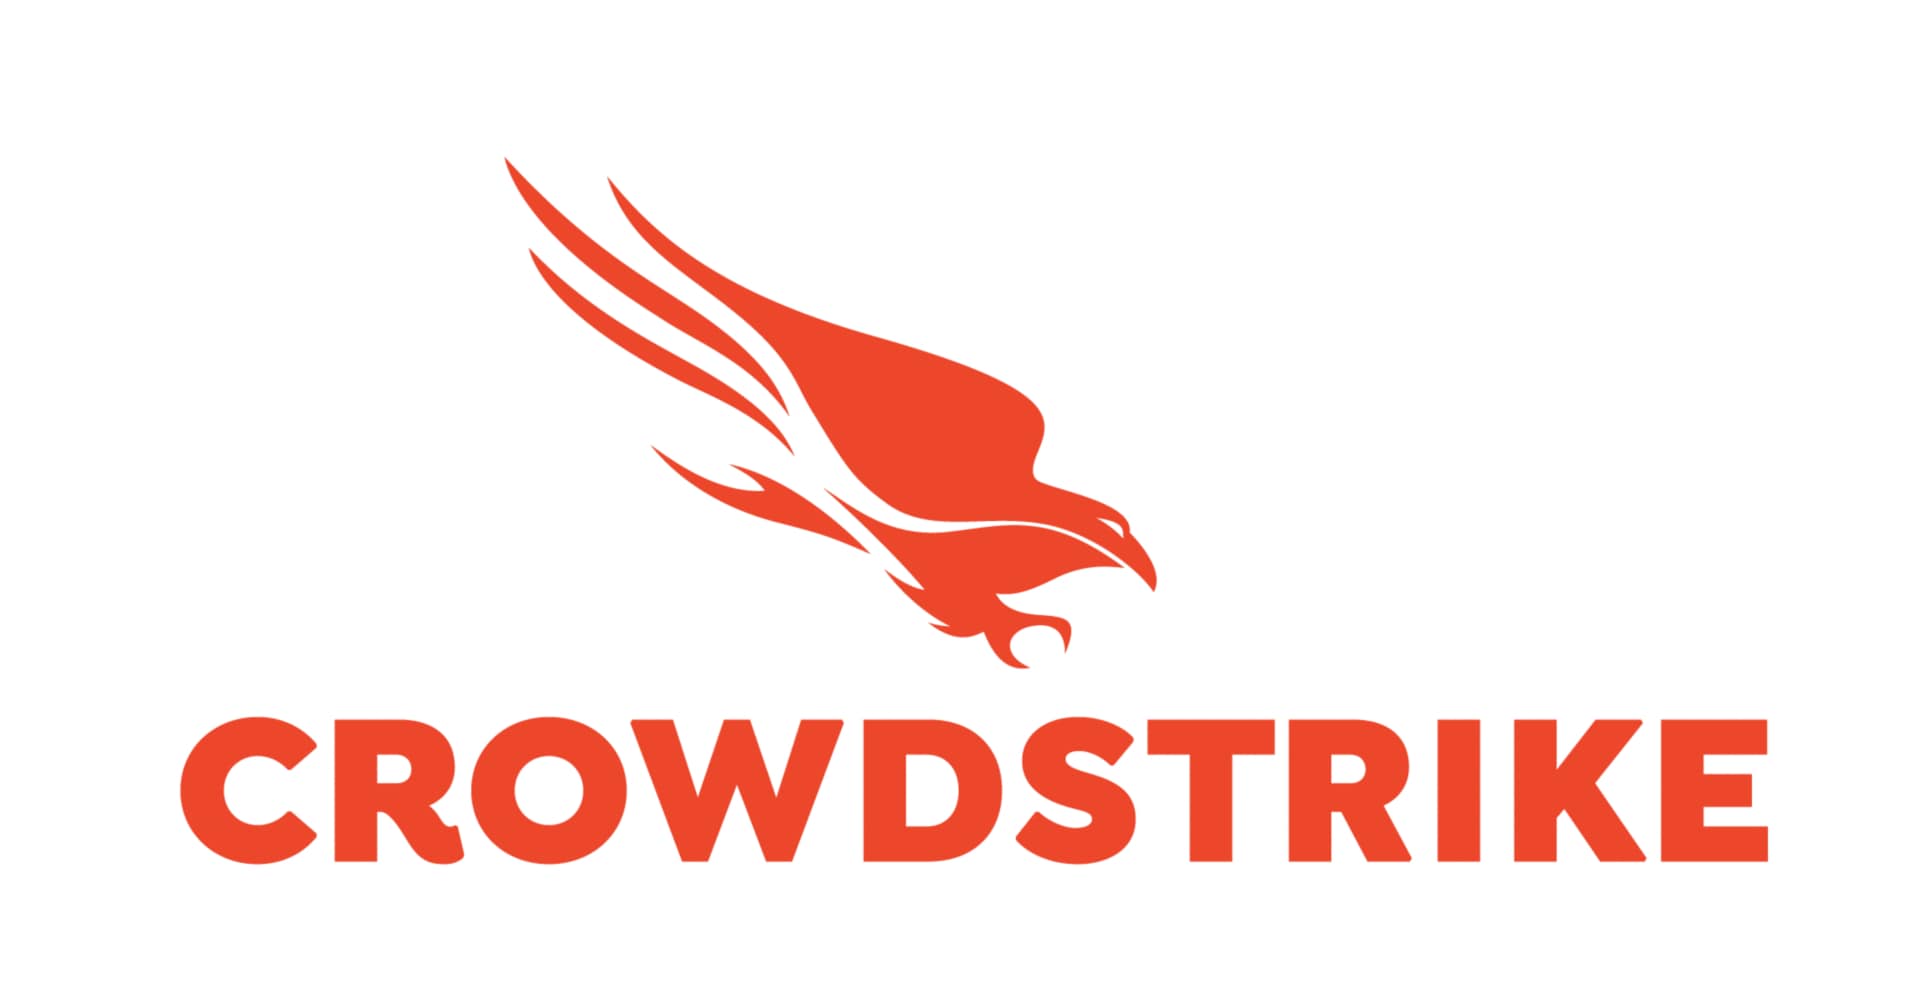 CrowdStrike 6-Month Falcon Complete Subscription